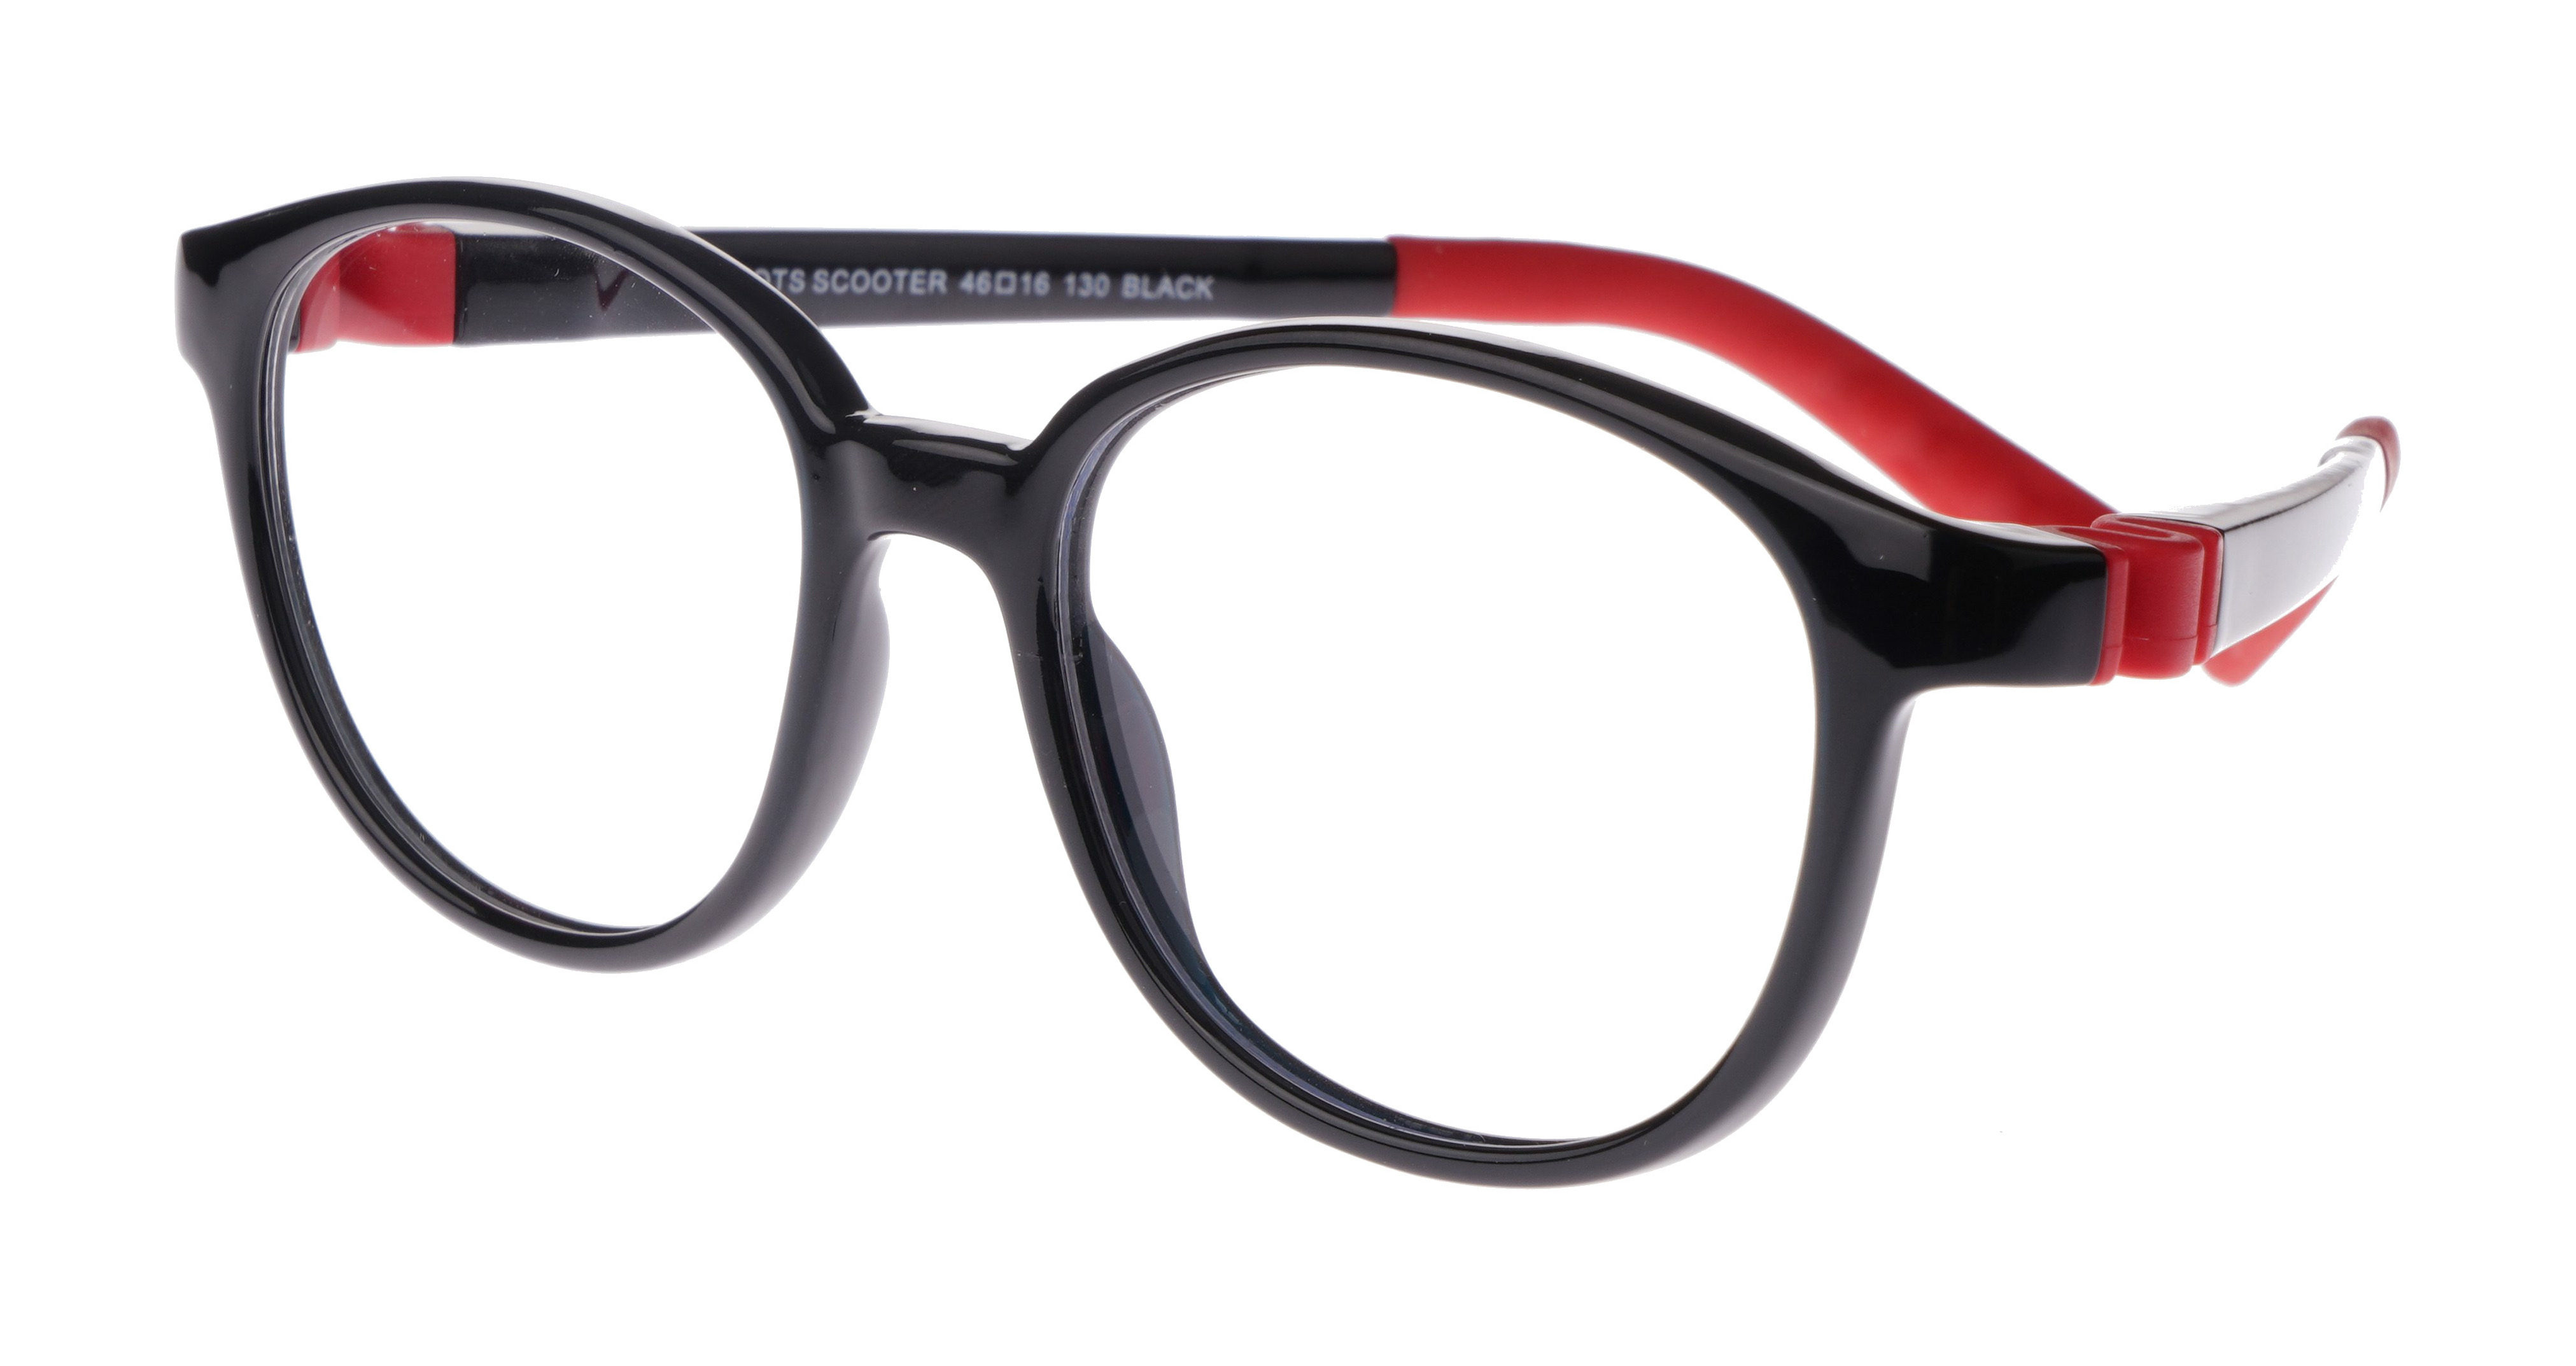 Foster Grant Reading Glasses Scooter Black Color with Gray Accents +1.75 :  Amazon.in: Health & Personal Care